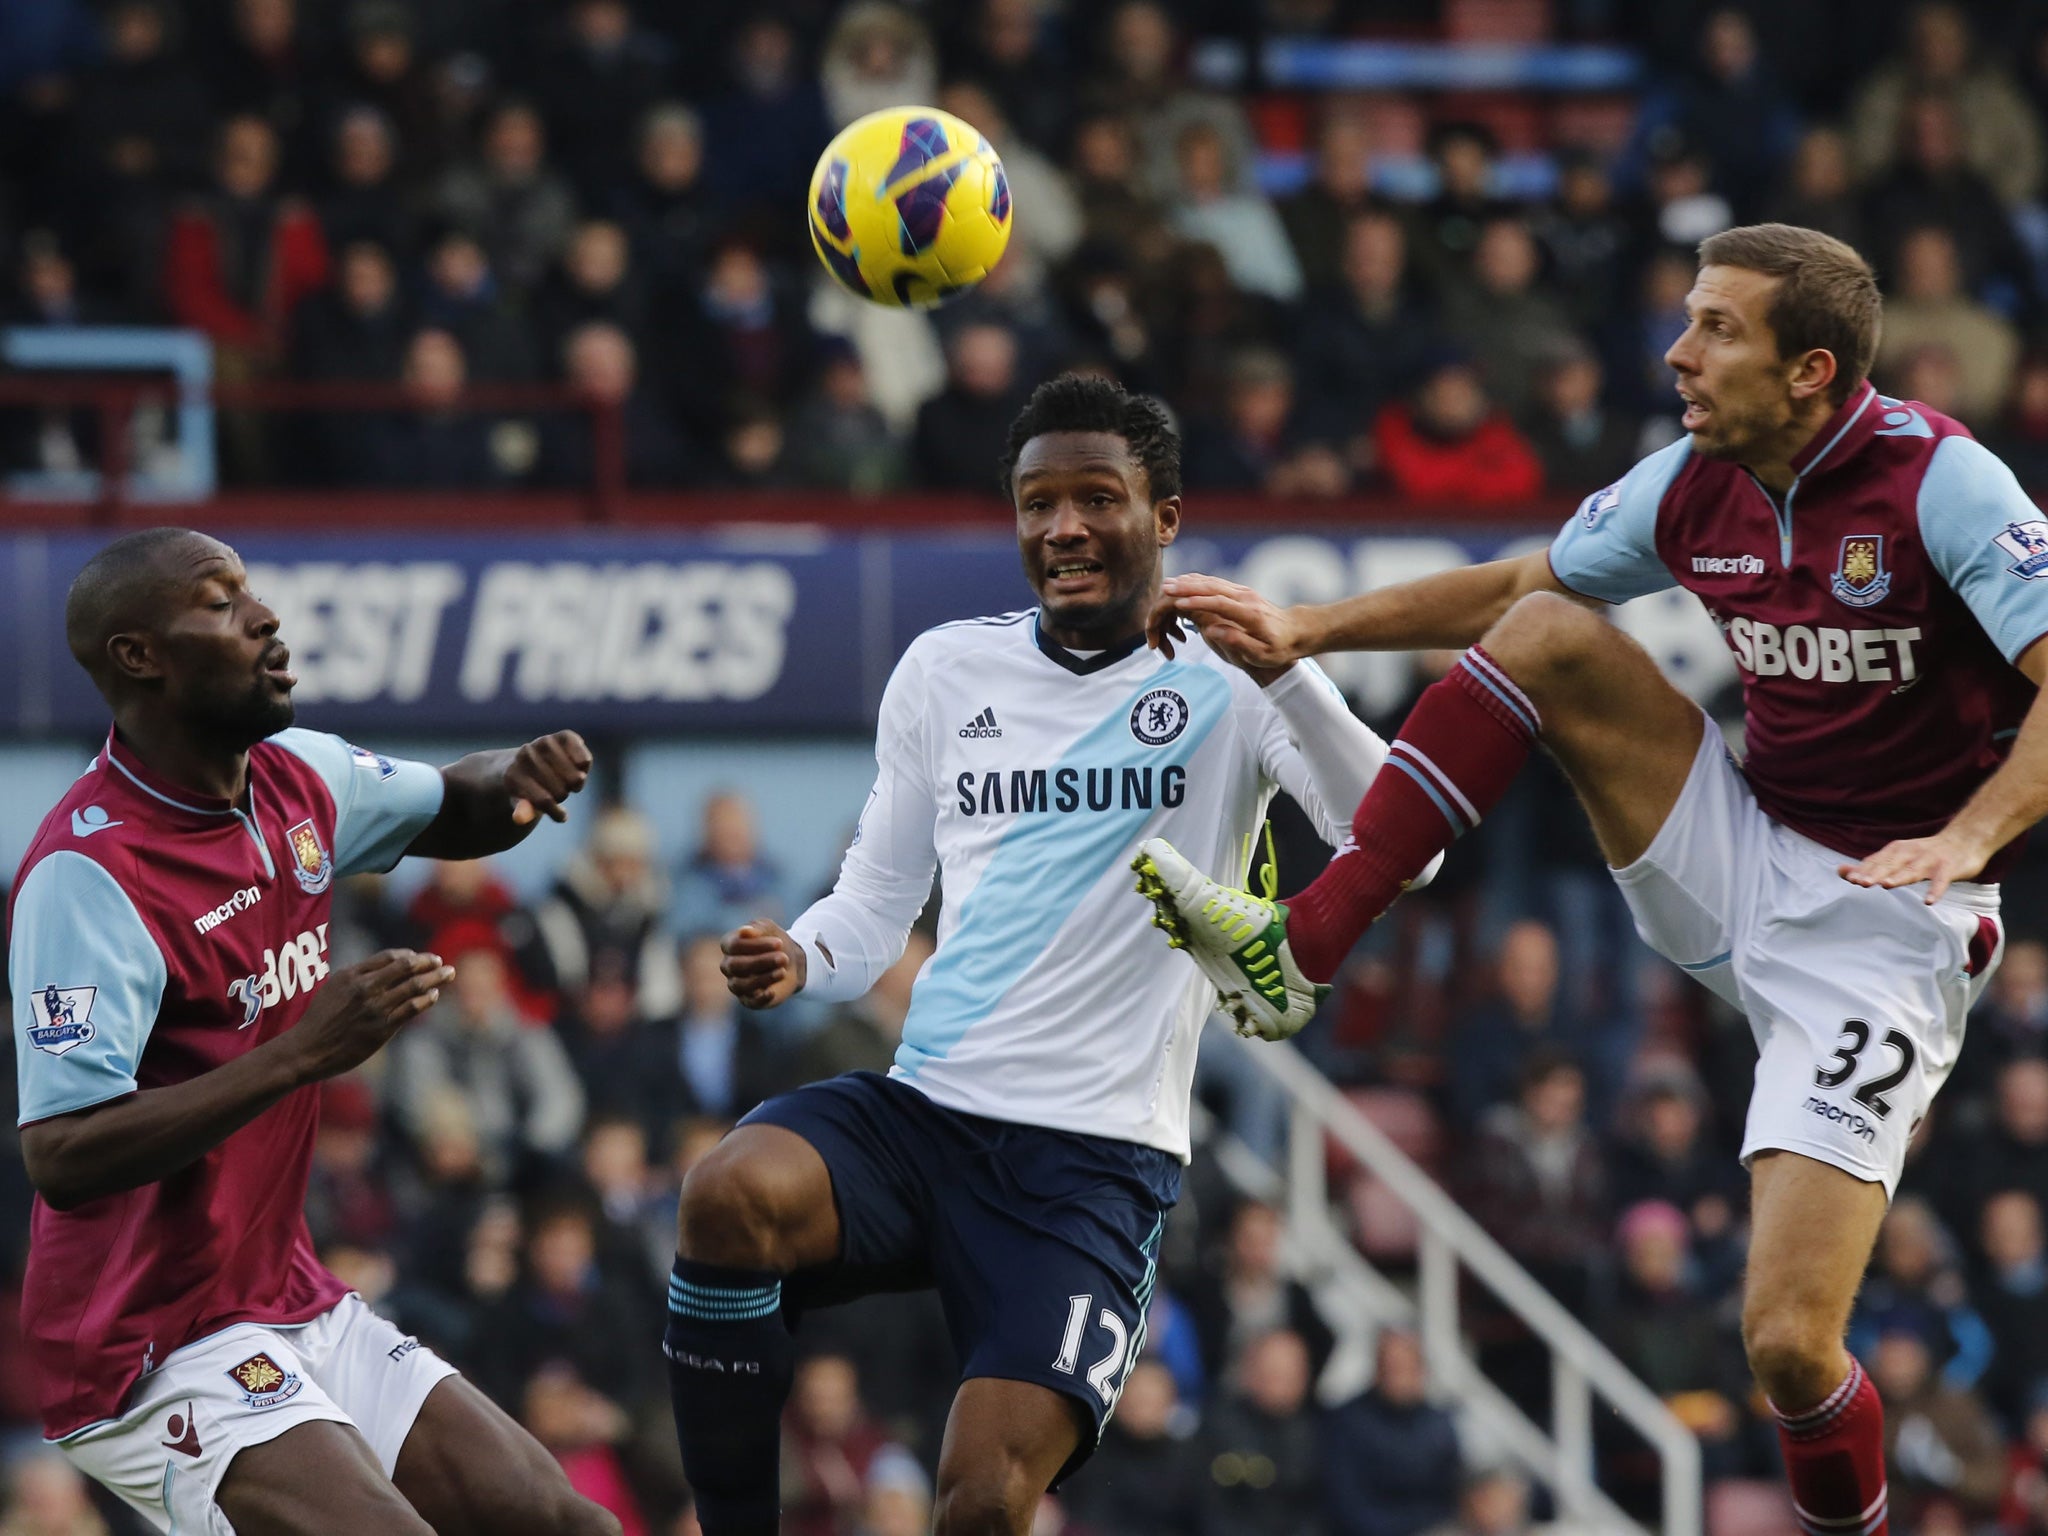 John Obi Mikel of Chelsea (C) vies for the ball with Gary O'Neil (R) and Carlton Cole (L) of West Ham United